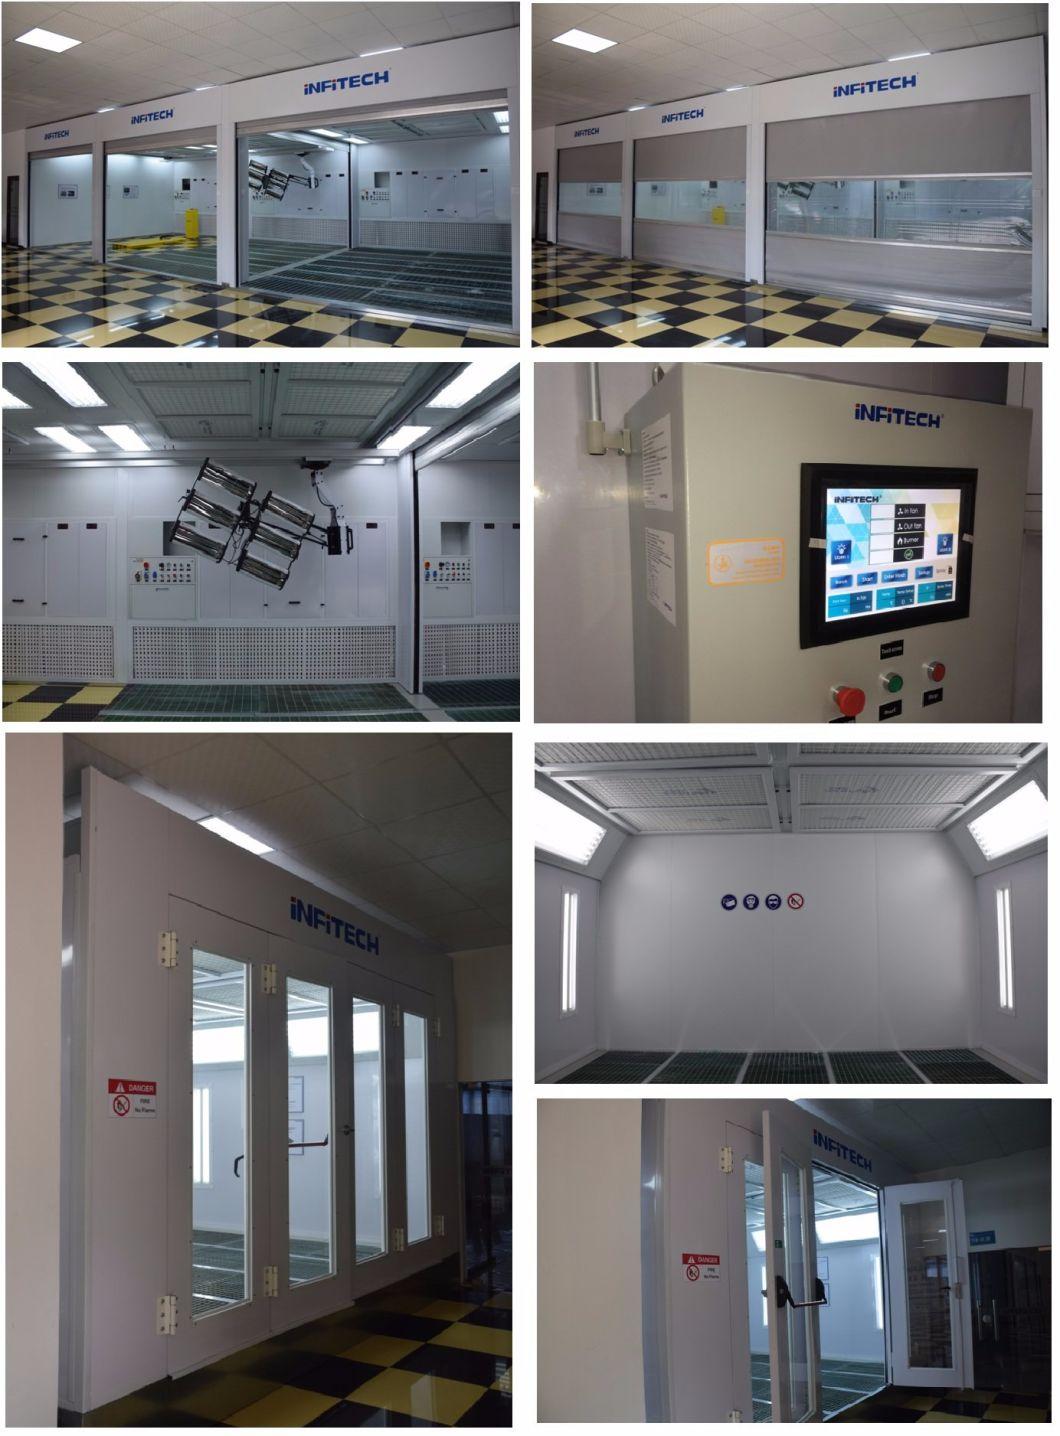 Infitech Best Performance Bus and Truck Paint Booth